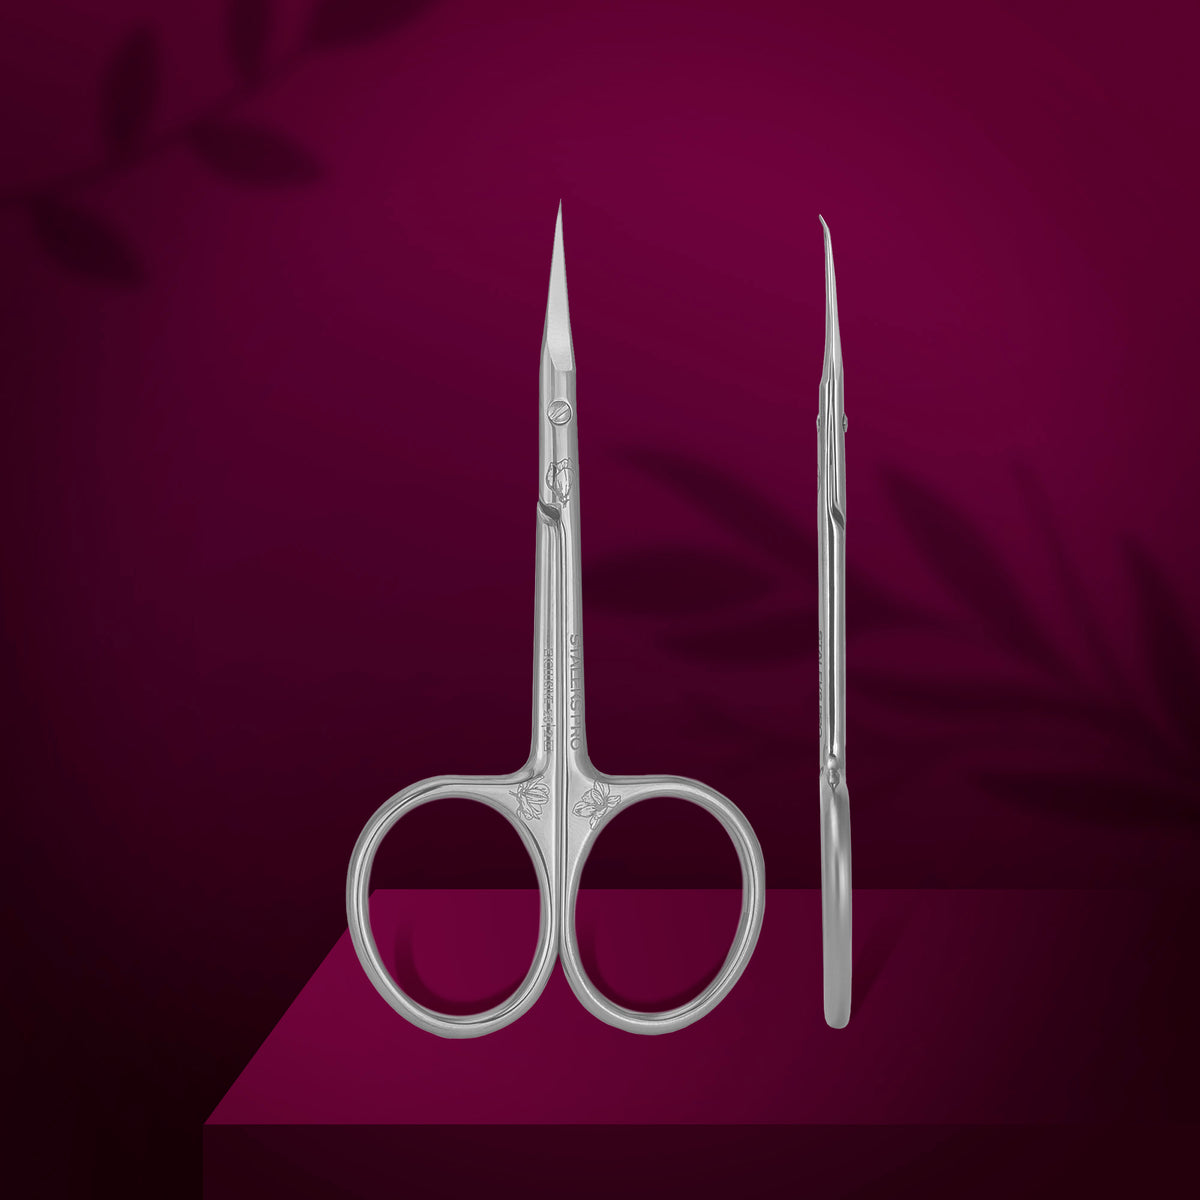 Professional cuticle scissors with hook EXCLUSIVE 23 TYPE 2 (magnolia)